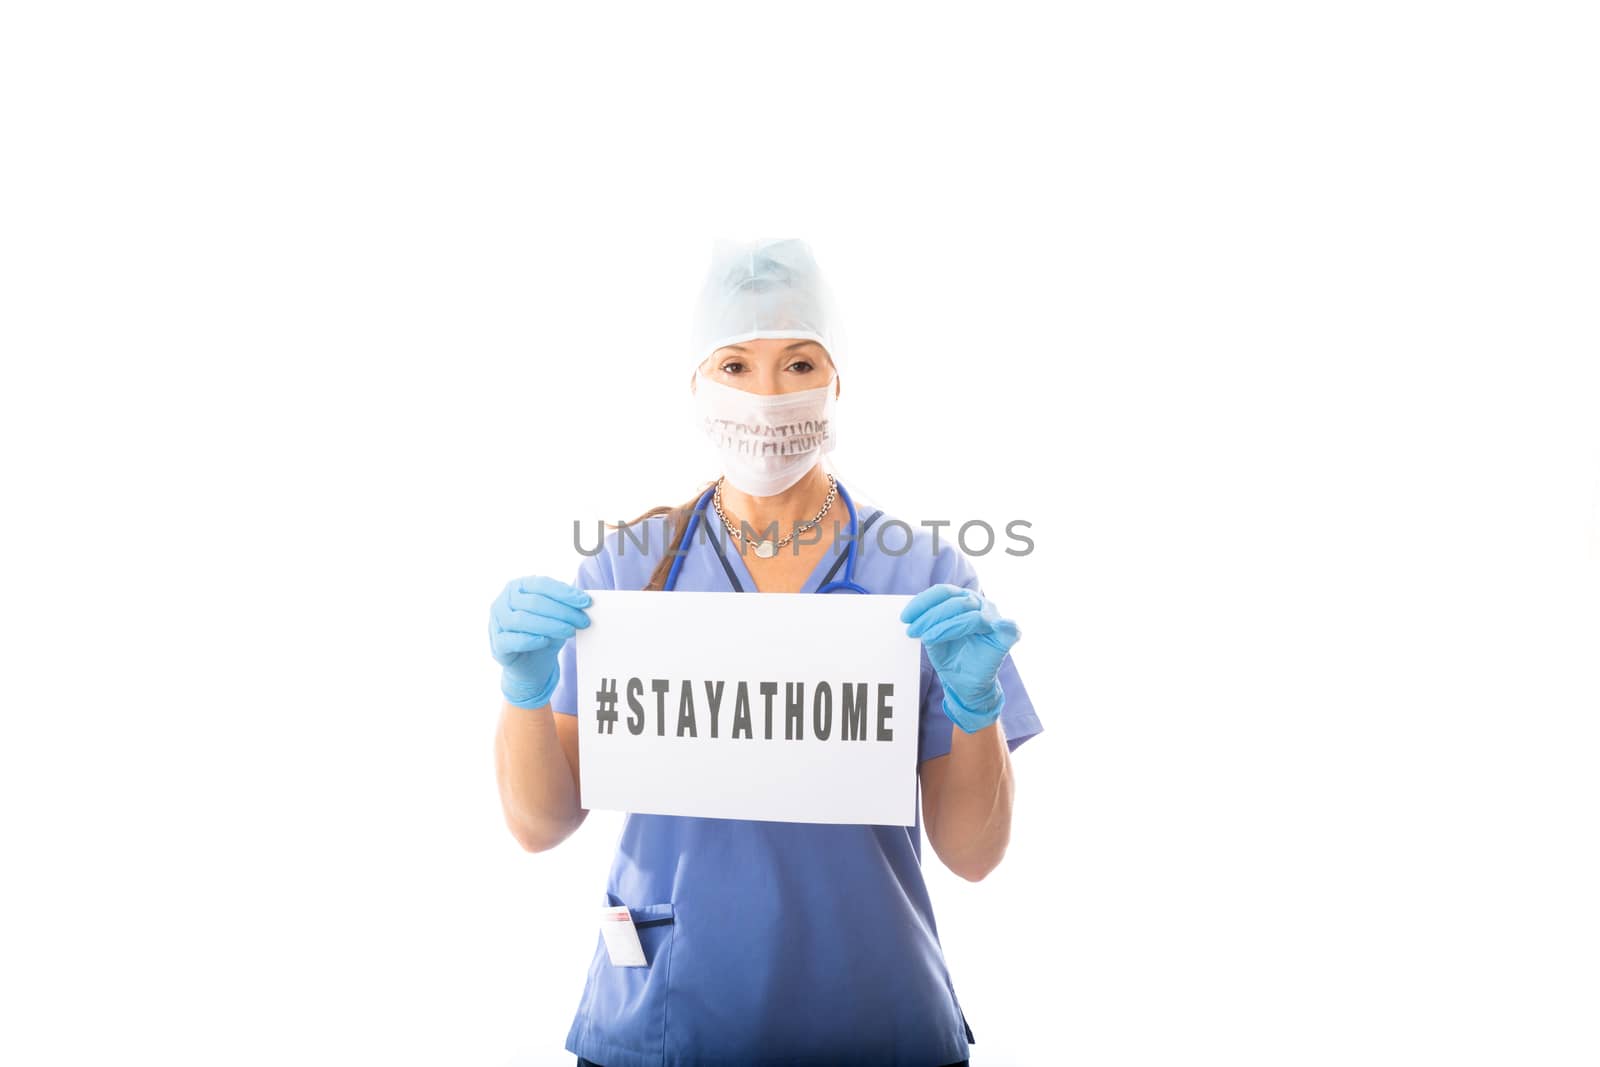 COVID-19 Doctor Nurse holding a sign encouraging community to stay at home during the COVID-19 virus pandemic.  She is wearing medical scrubs, gloves and mask with a message